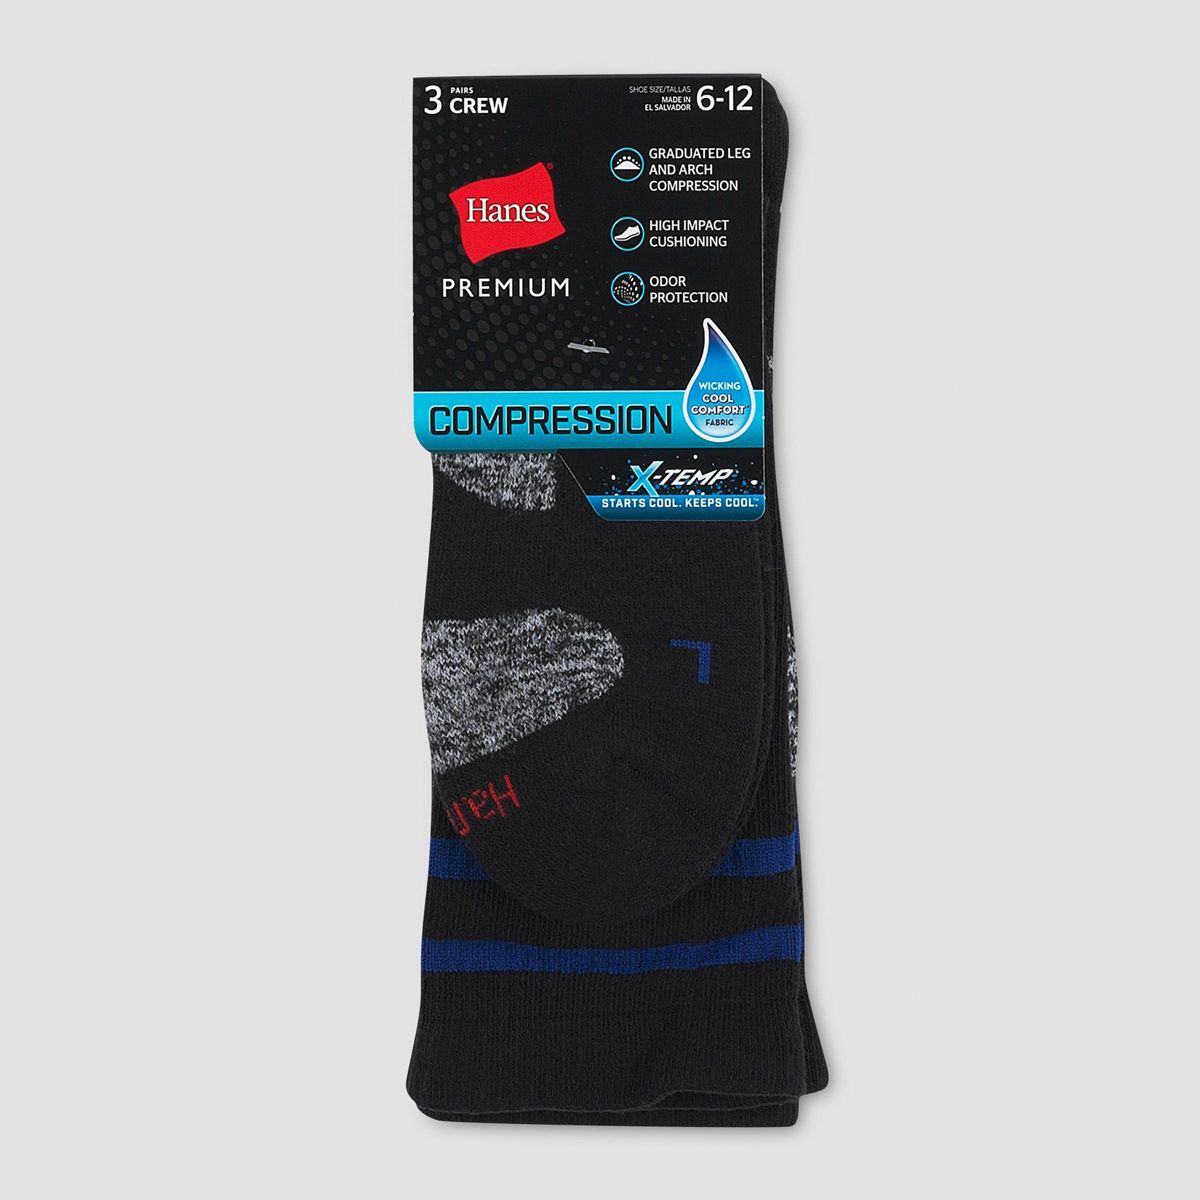 Black Hanes Cotton Compression socks in a 3-pack